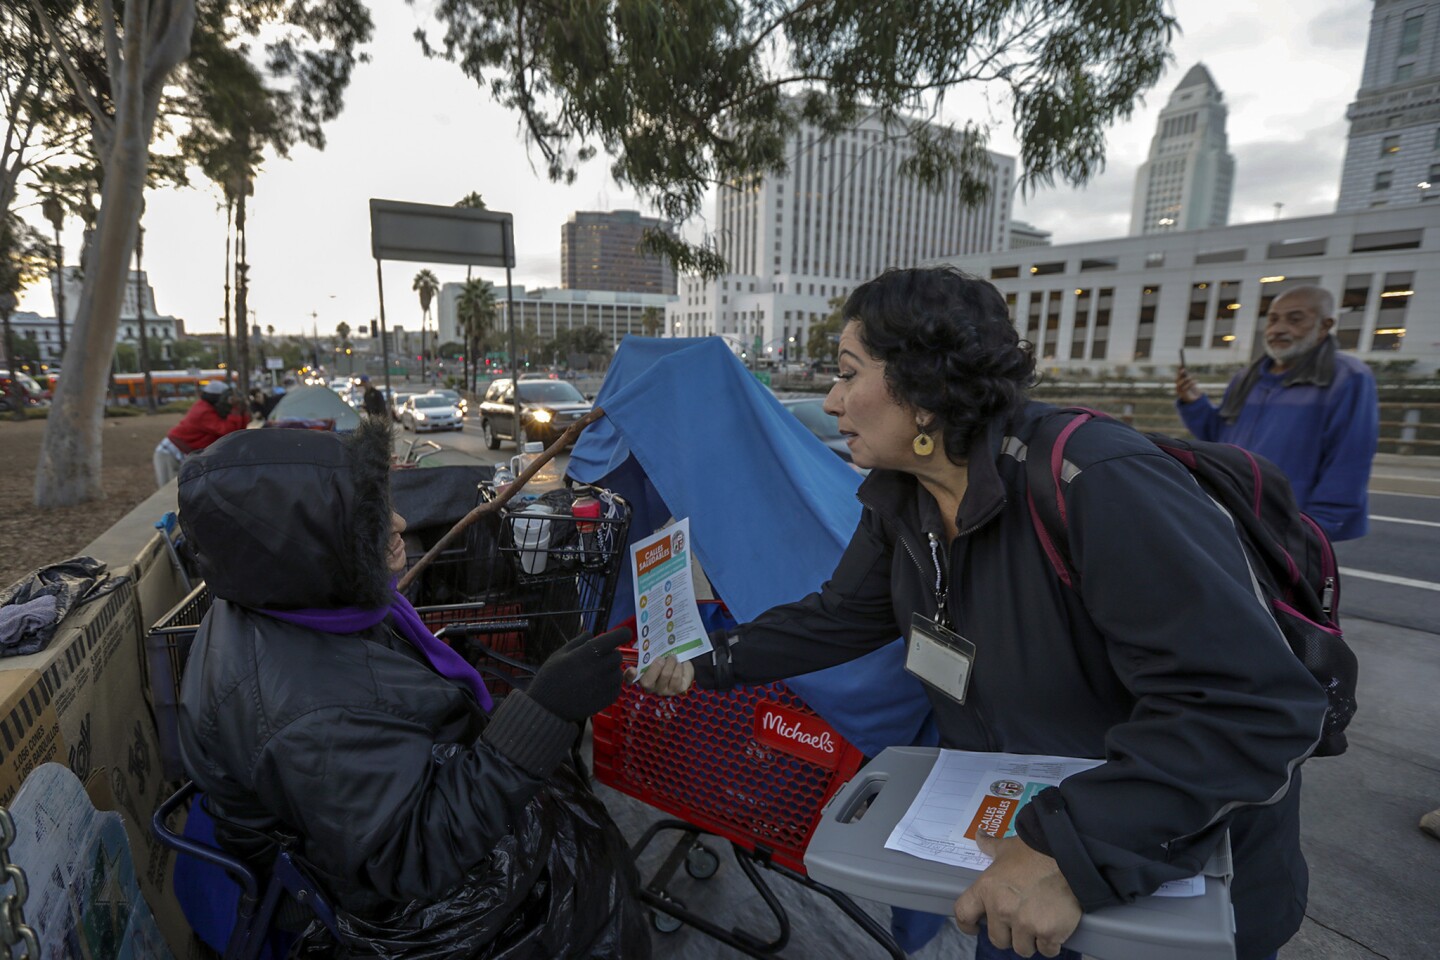 Lisa Pacheco of the Los Angeles Homeless Services Authority, right, gives a leaflet about new rules and restrictions to Alla Gavorkan, 61, who lives in a tent in downtown Los Angeles' El Pueblo historic district.